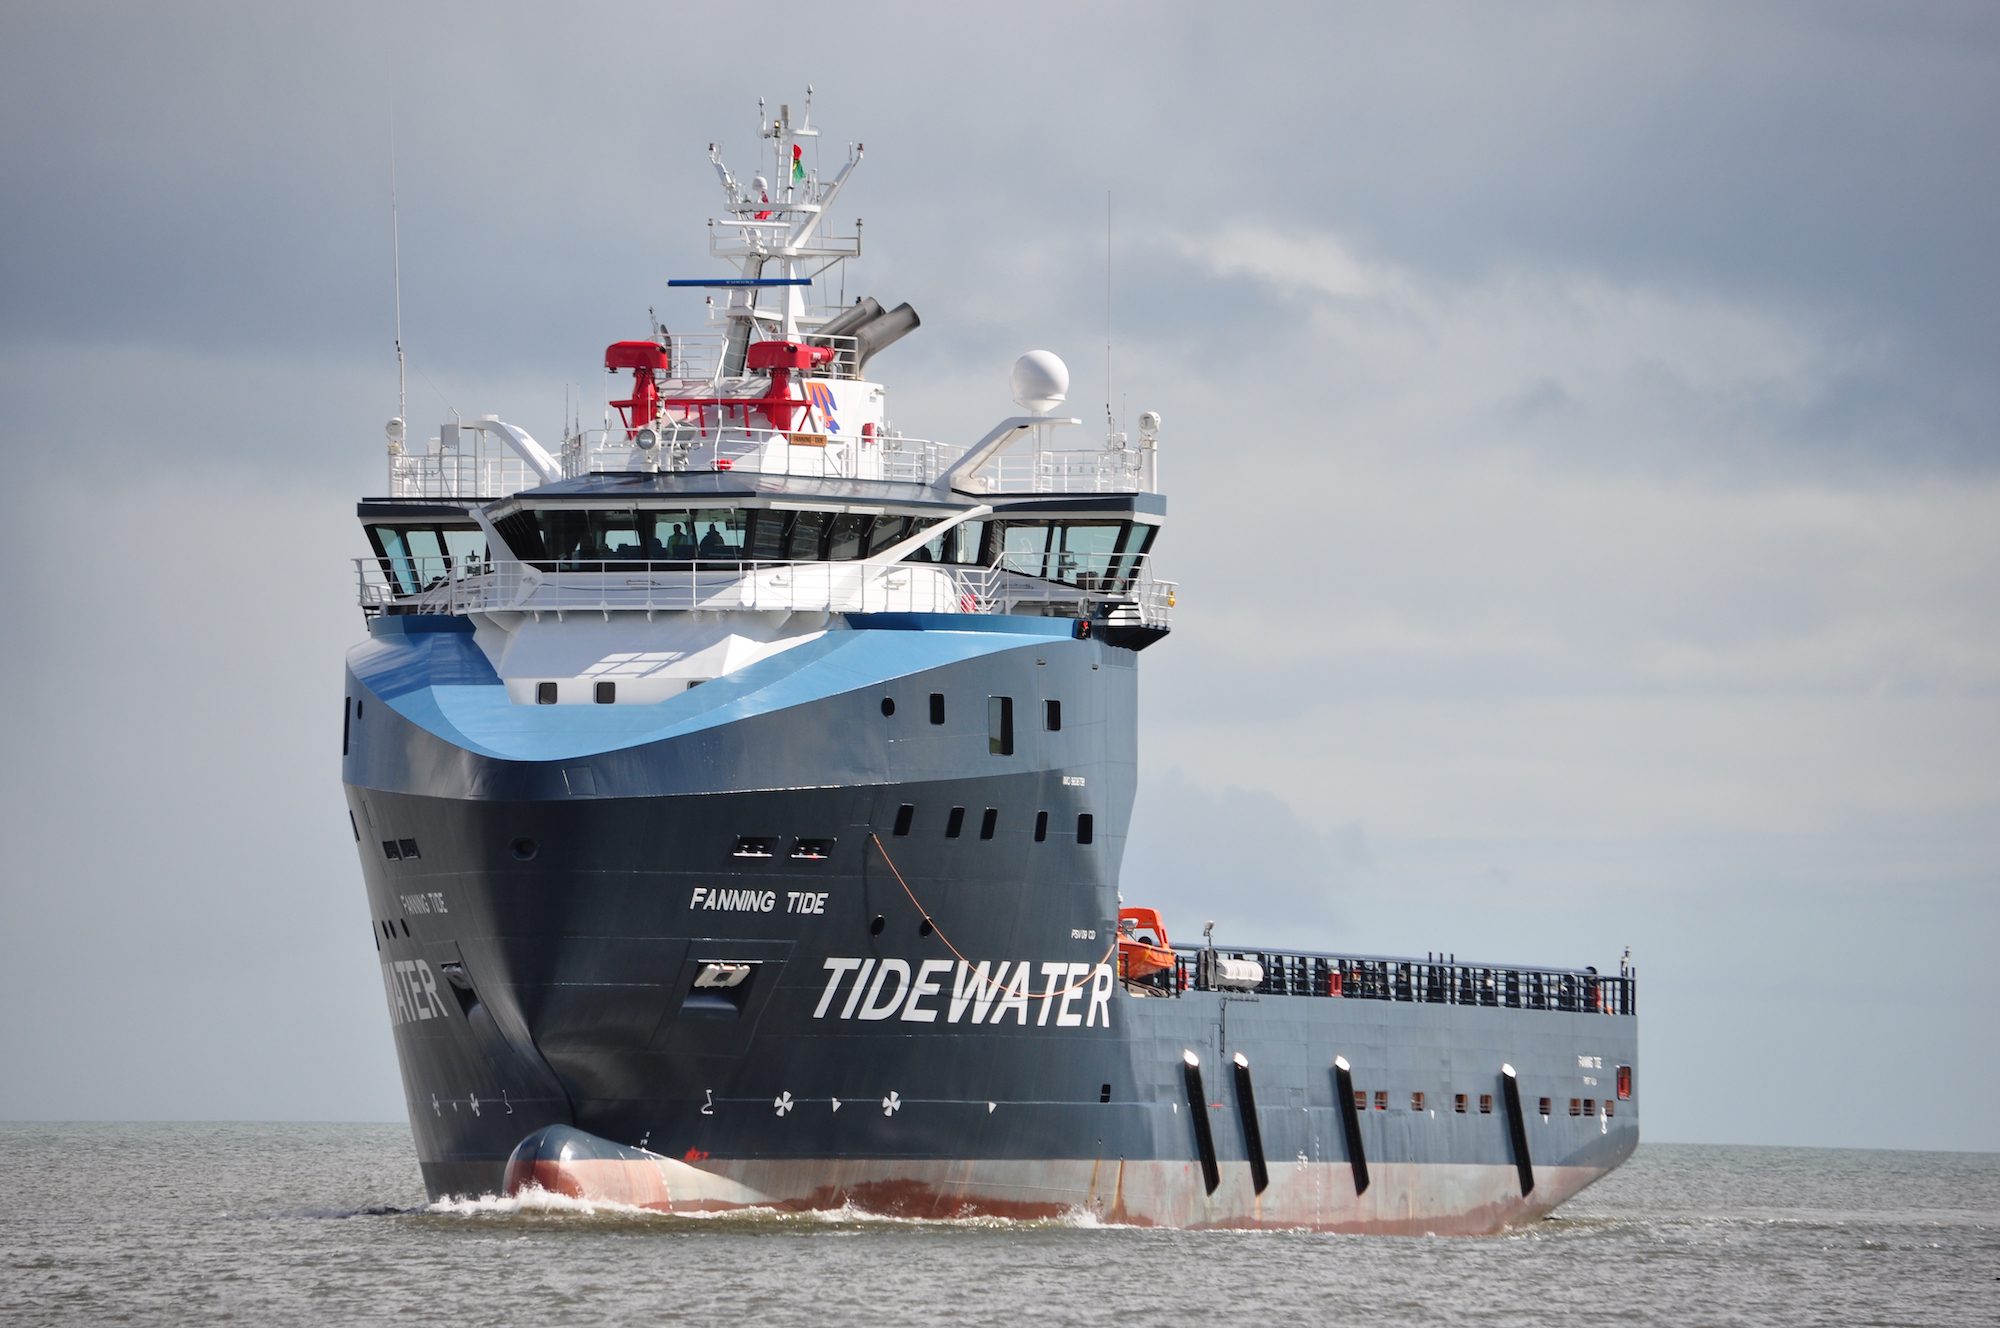 Tidewater offshore vessel at sea